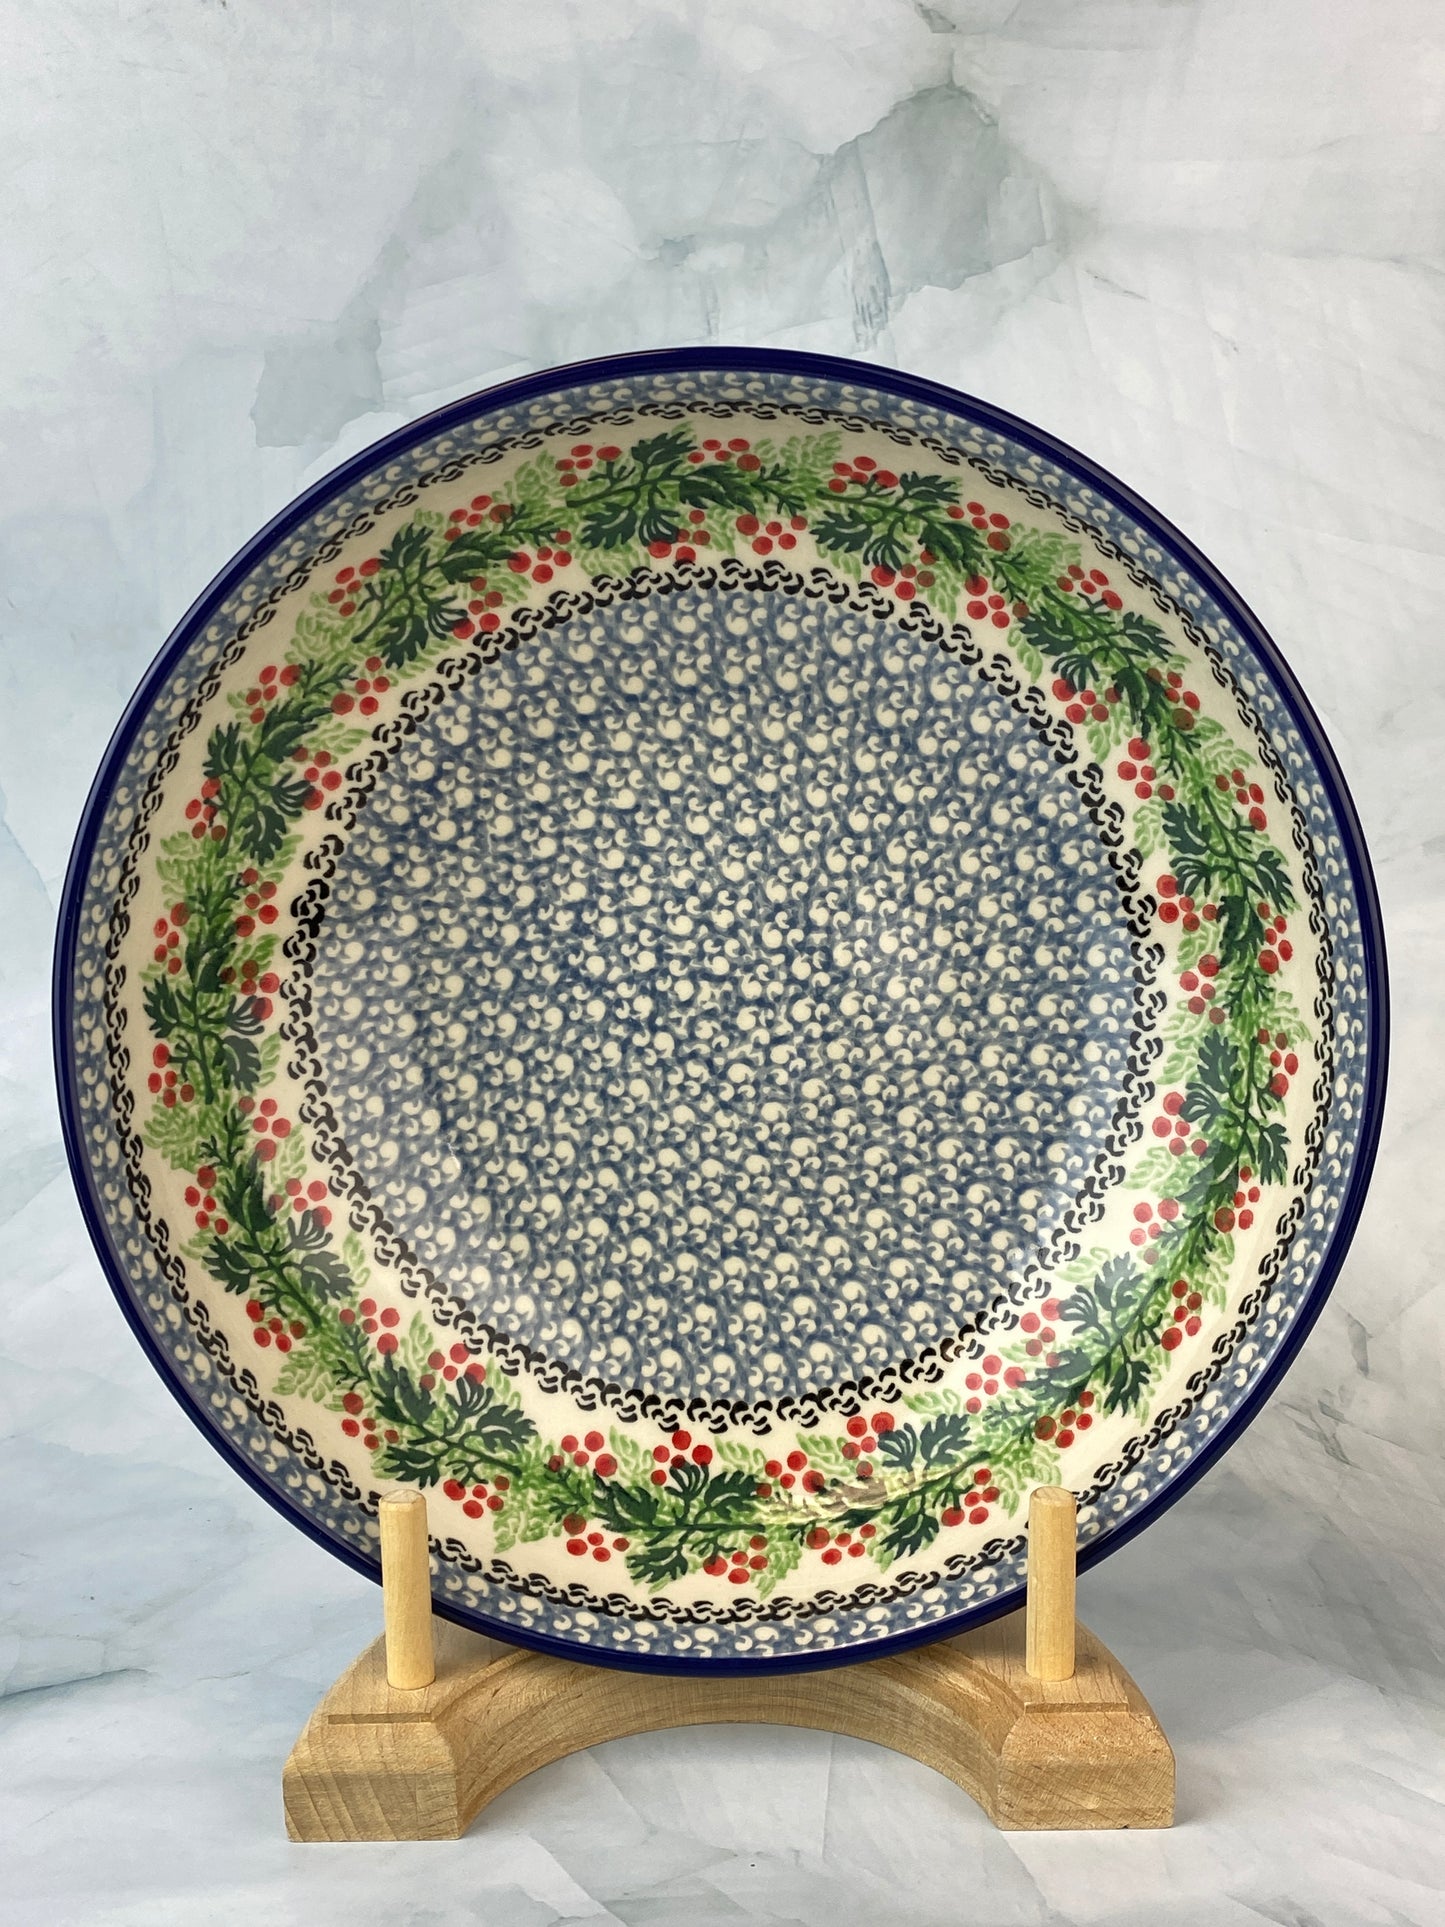 HOLIDAY SPECIAL 8.5" Serving Bowl - Shape B91 - Pattern 1734